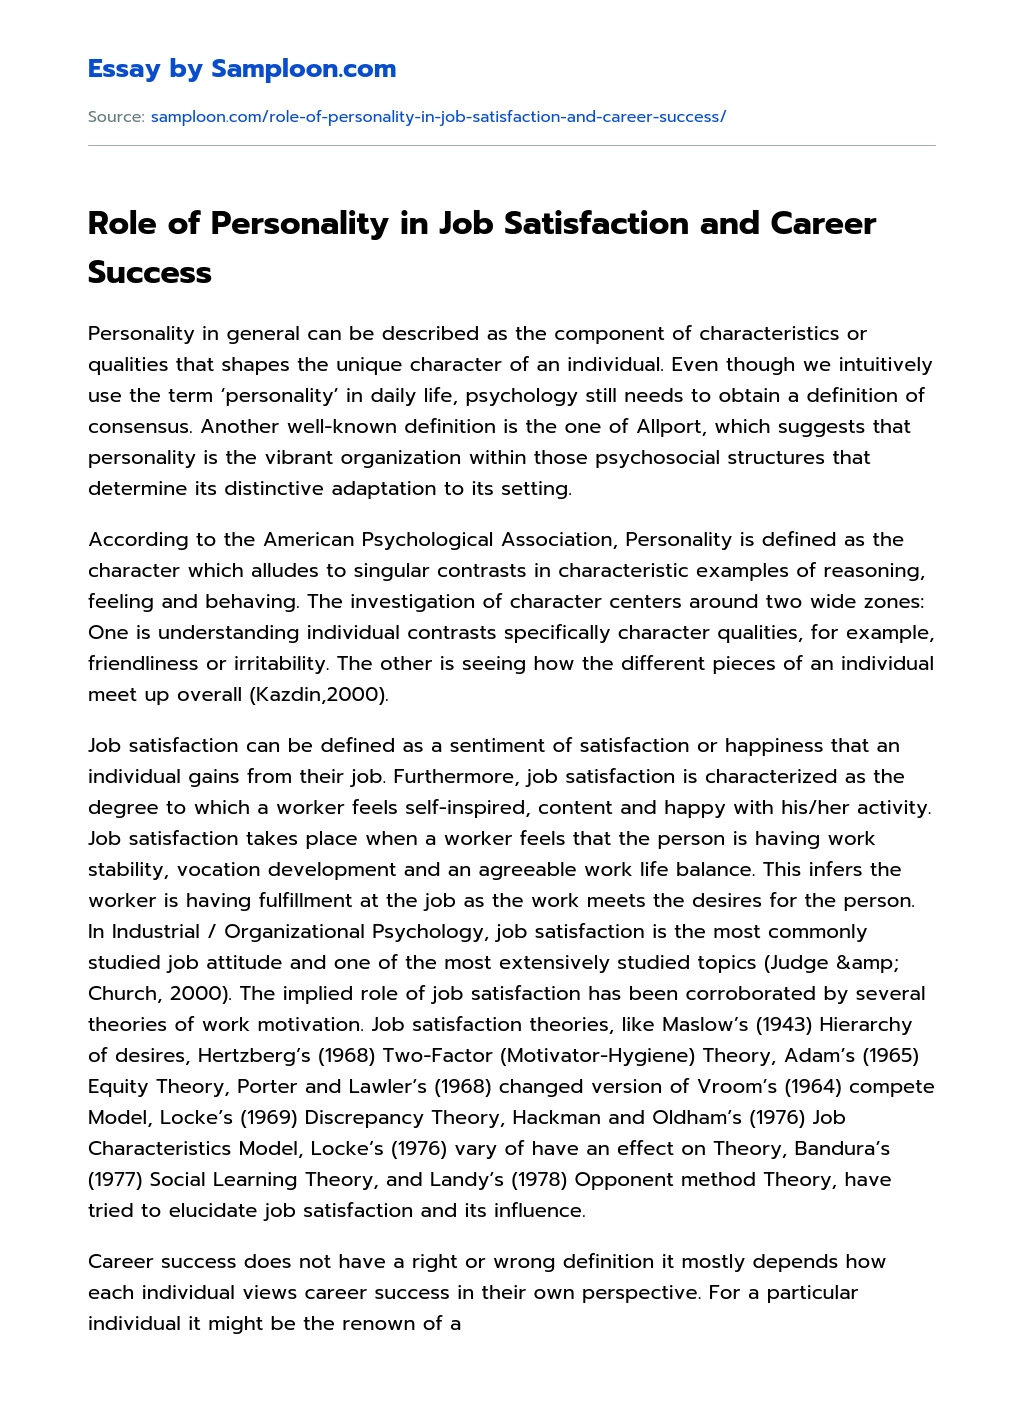 Role of Personality in Job Satisfaction and Career Success Application essay